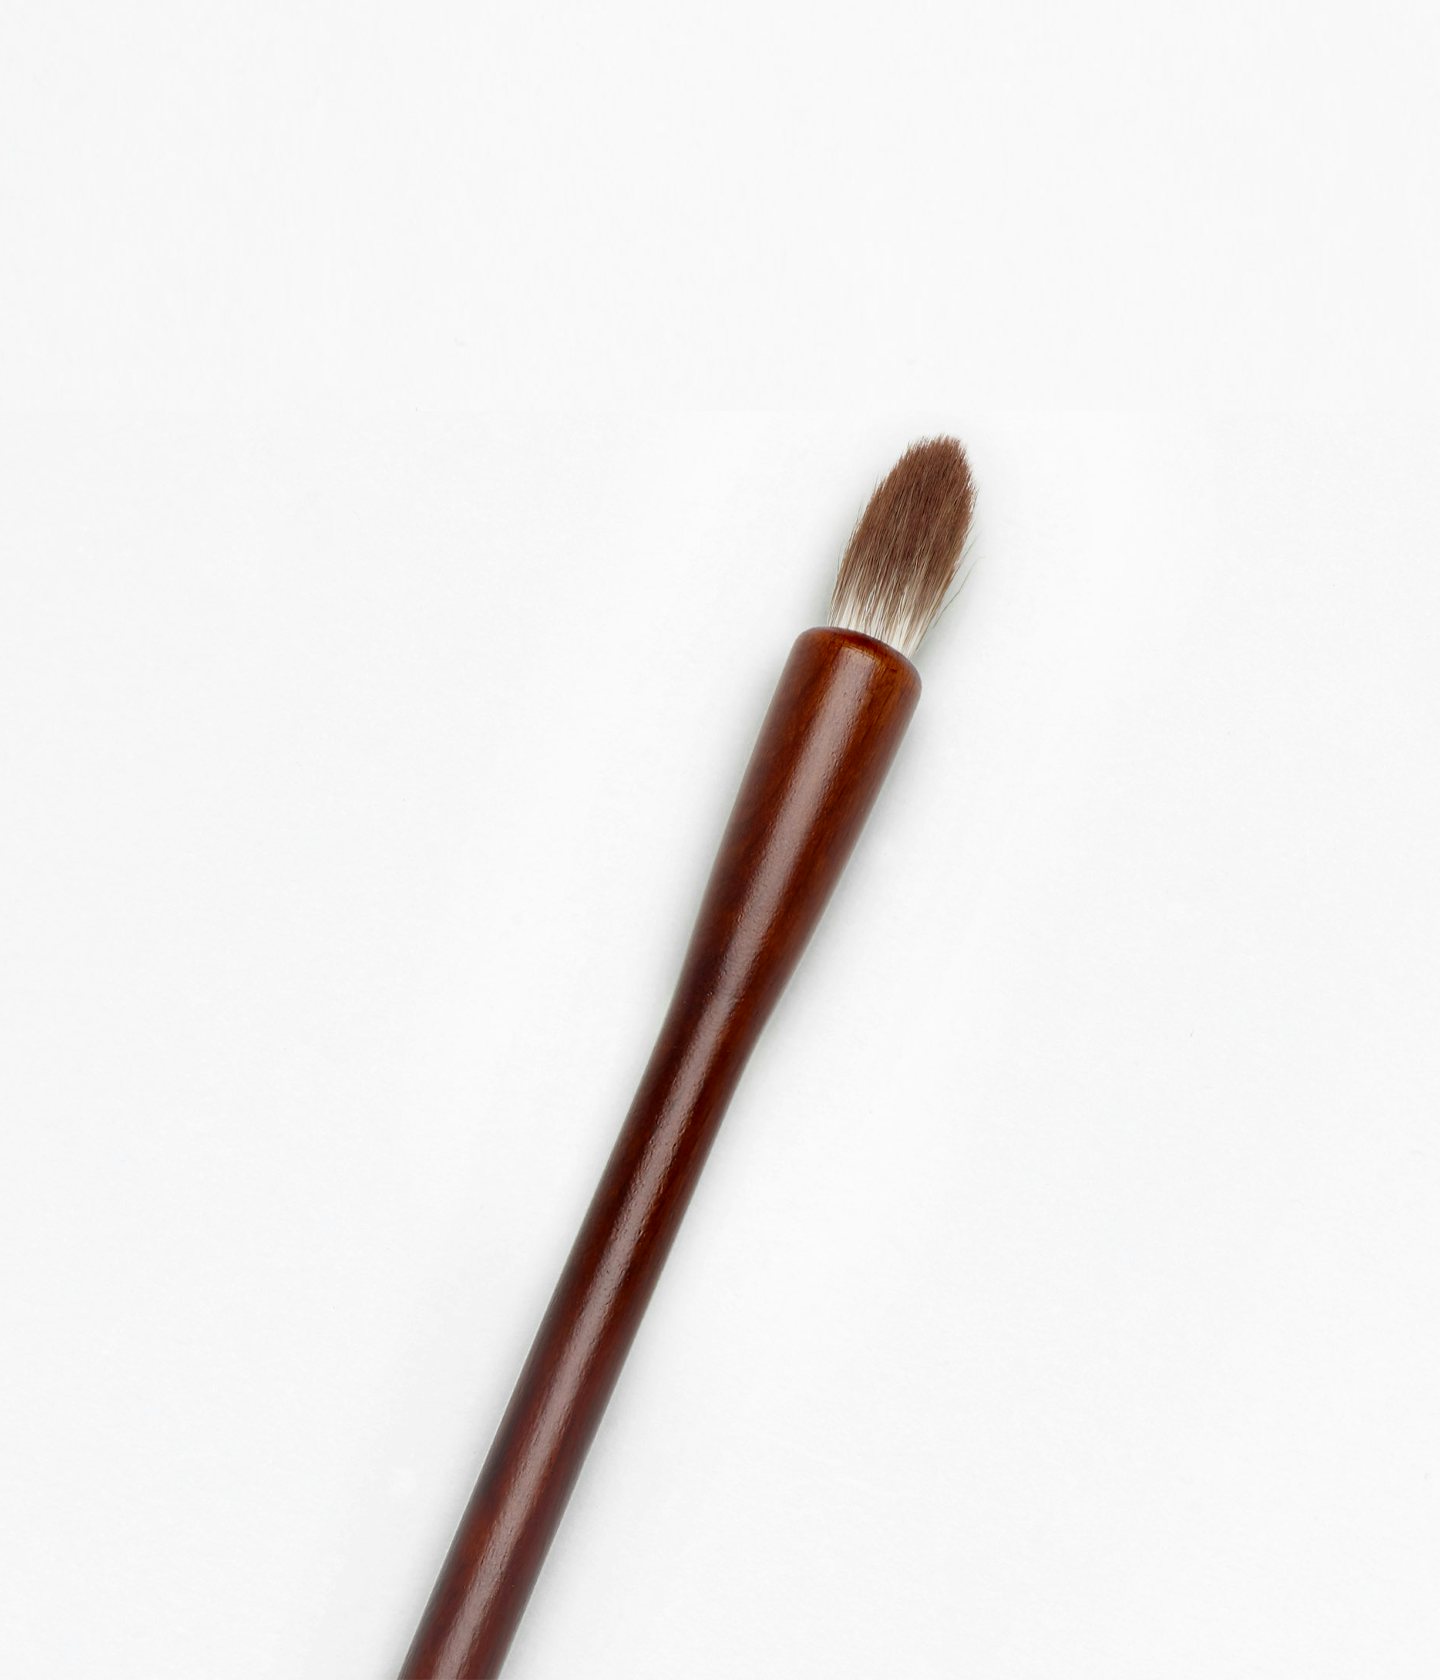 La bouche rouge eyeshadow blender brush zoomed in on the hairs of the brush